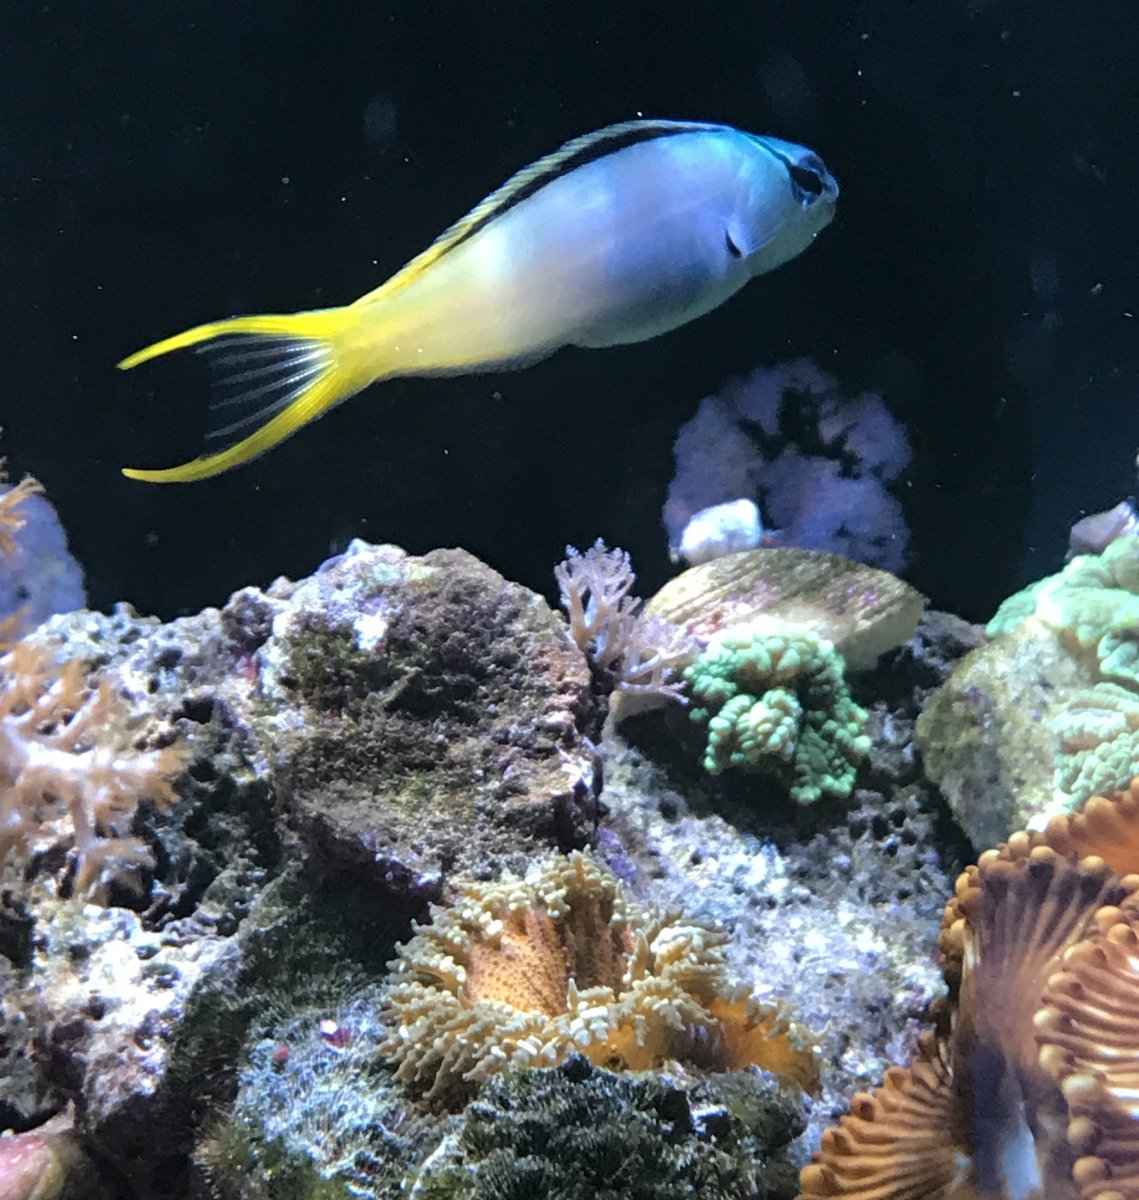 I Found A Beautiful, Small Fish For A Small Reef Tank